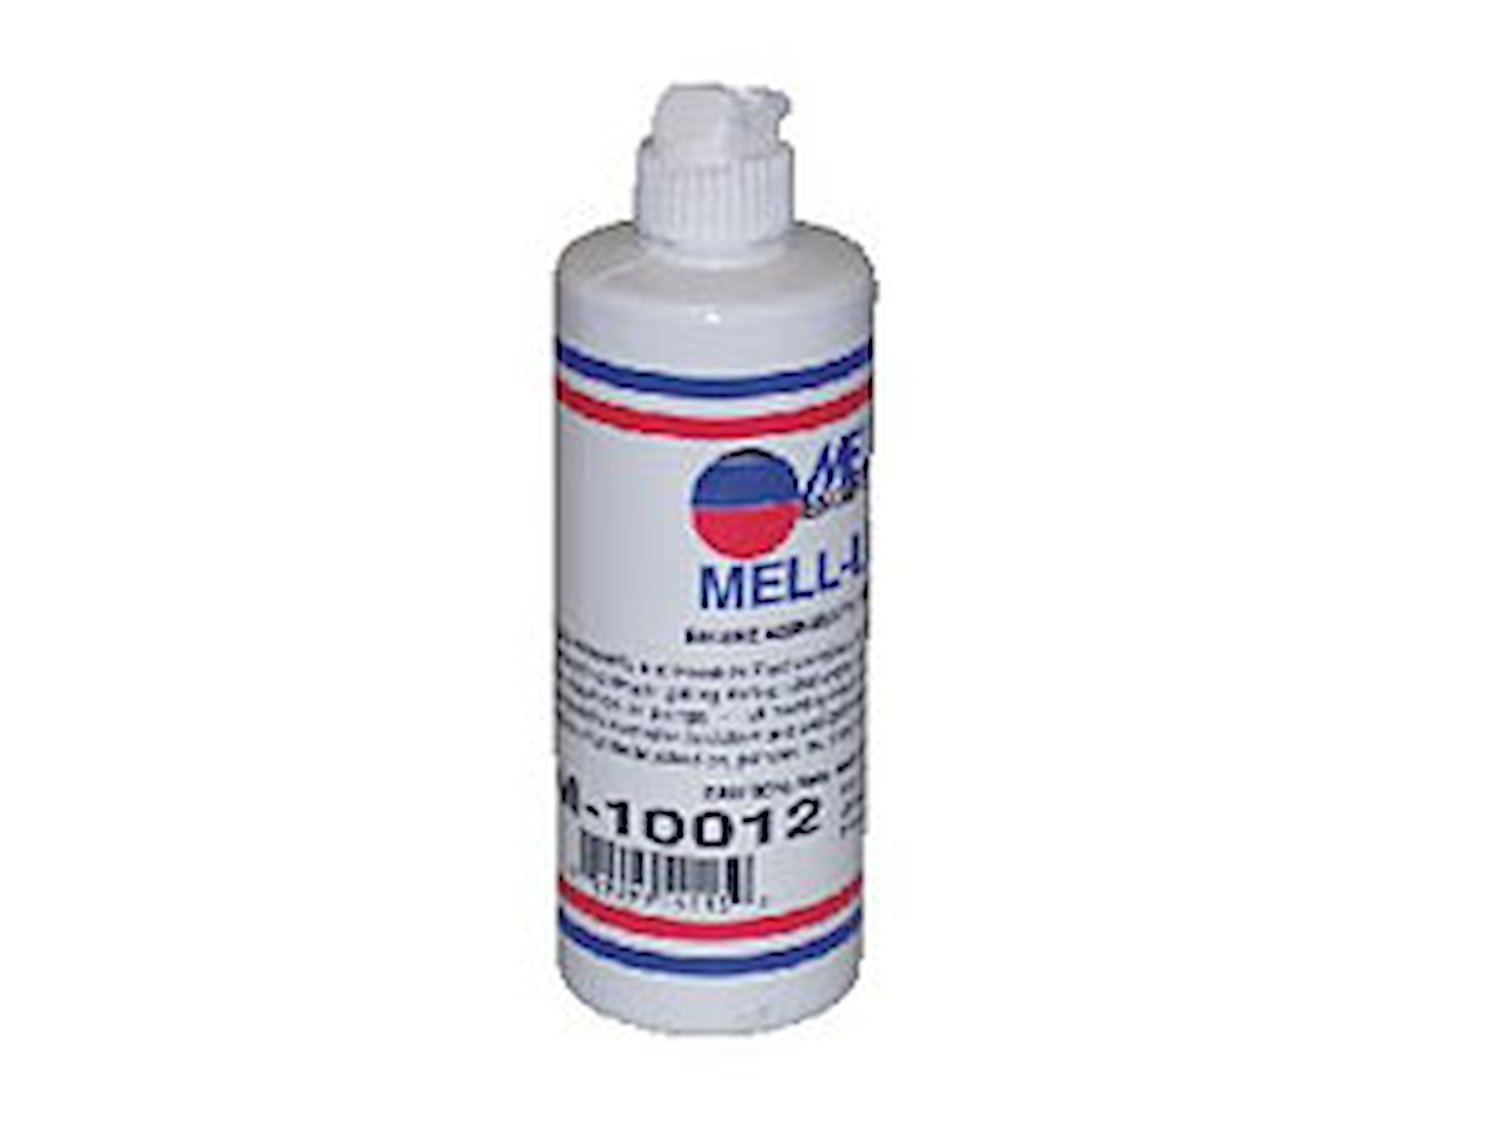 Mell-Lube Engine Assembly and Break-In Fluid